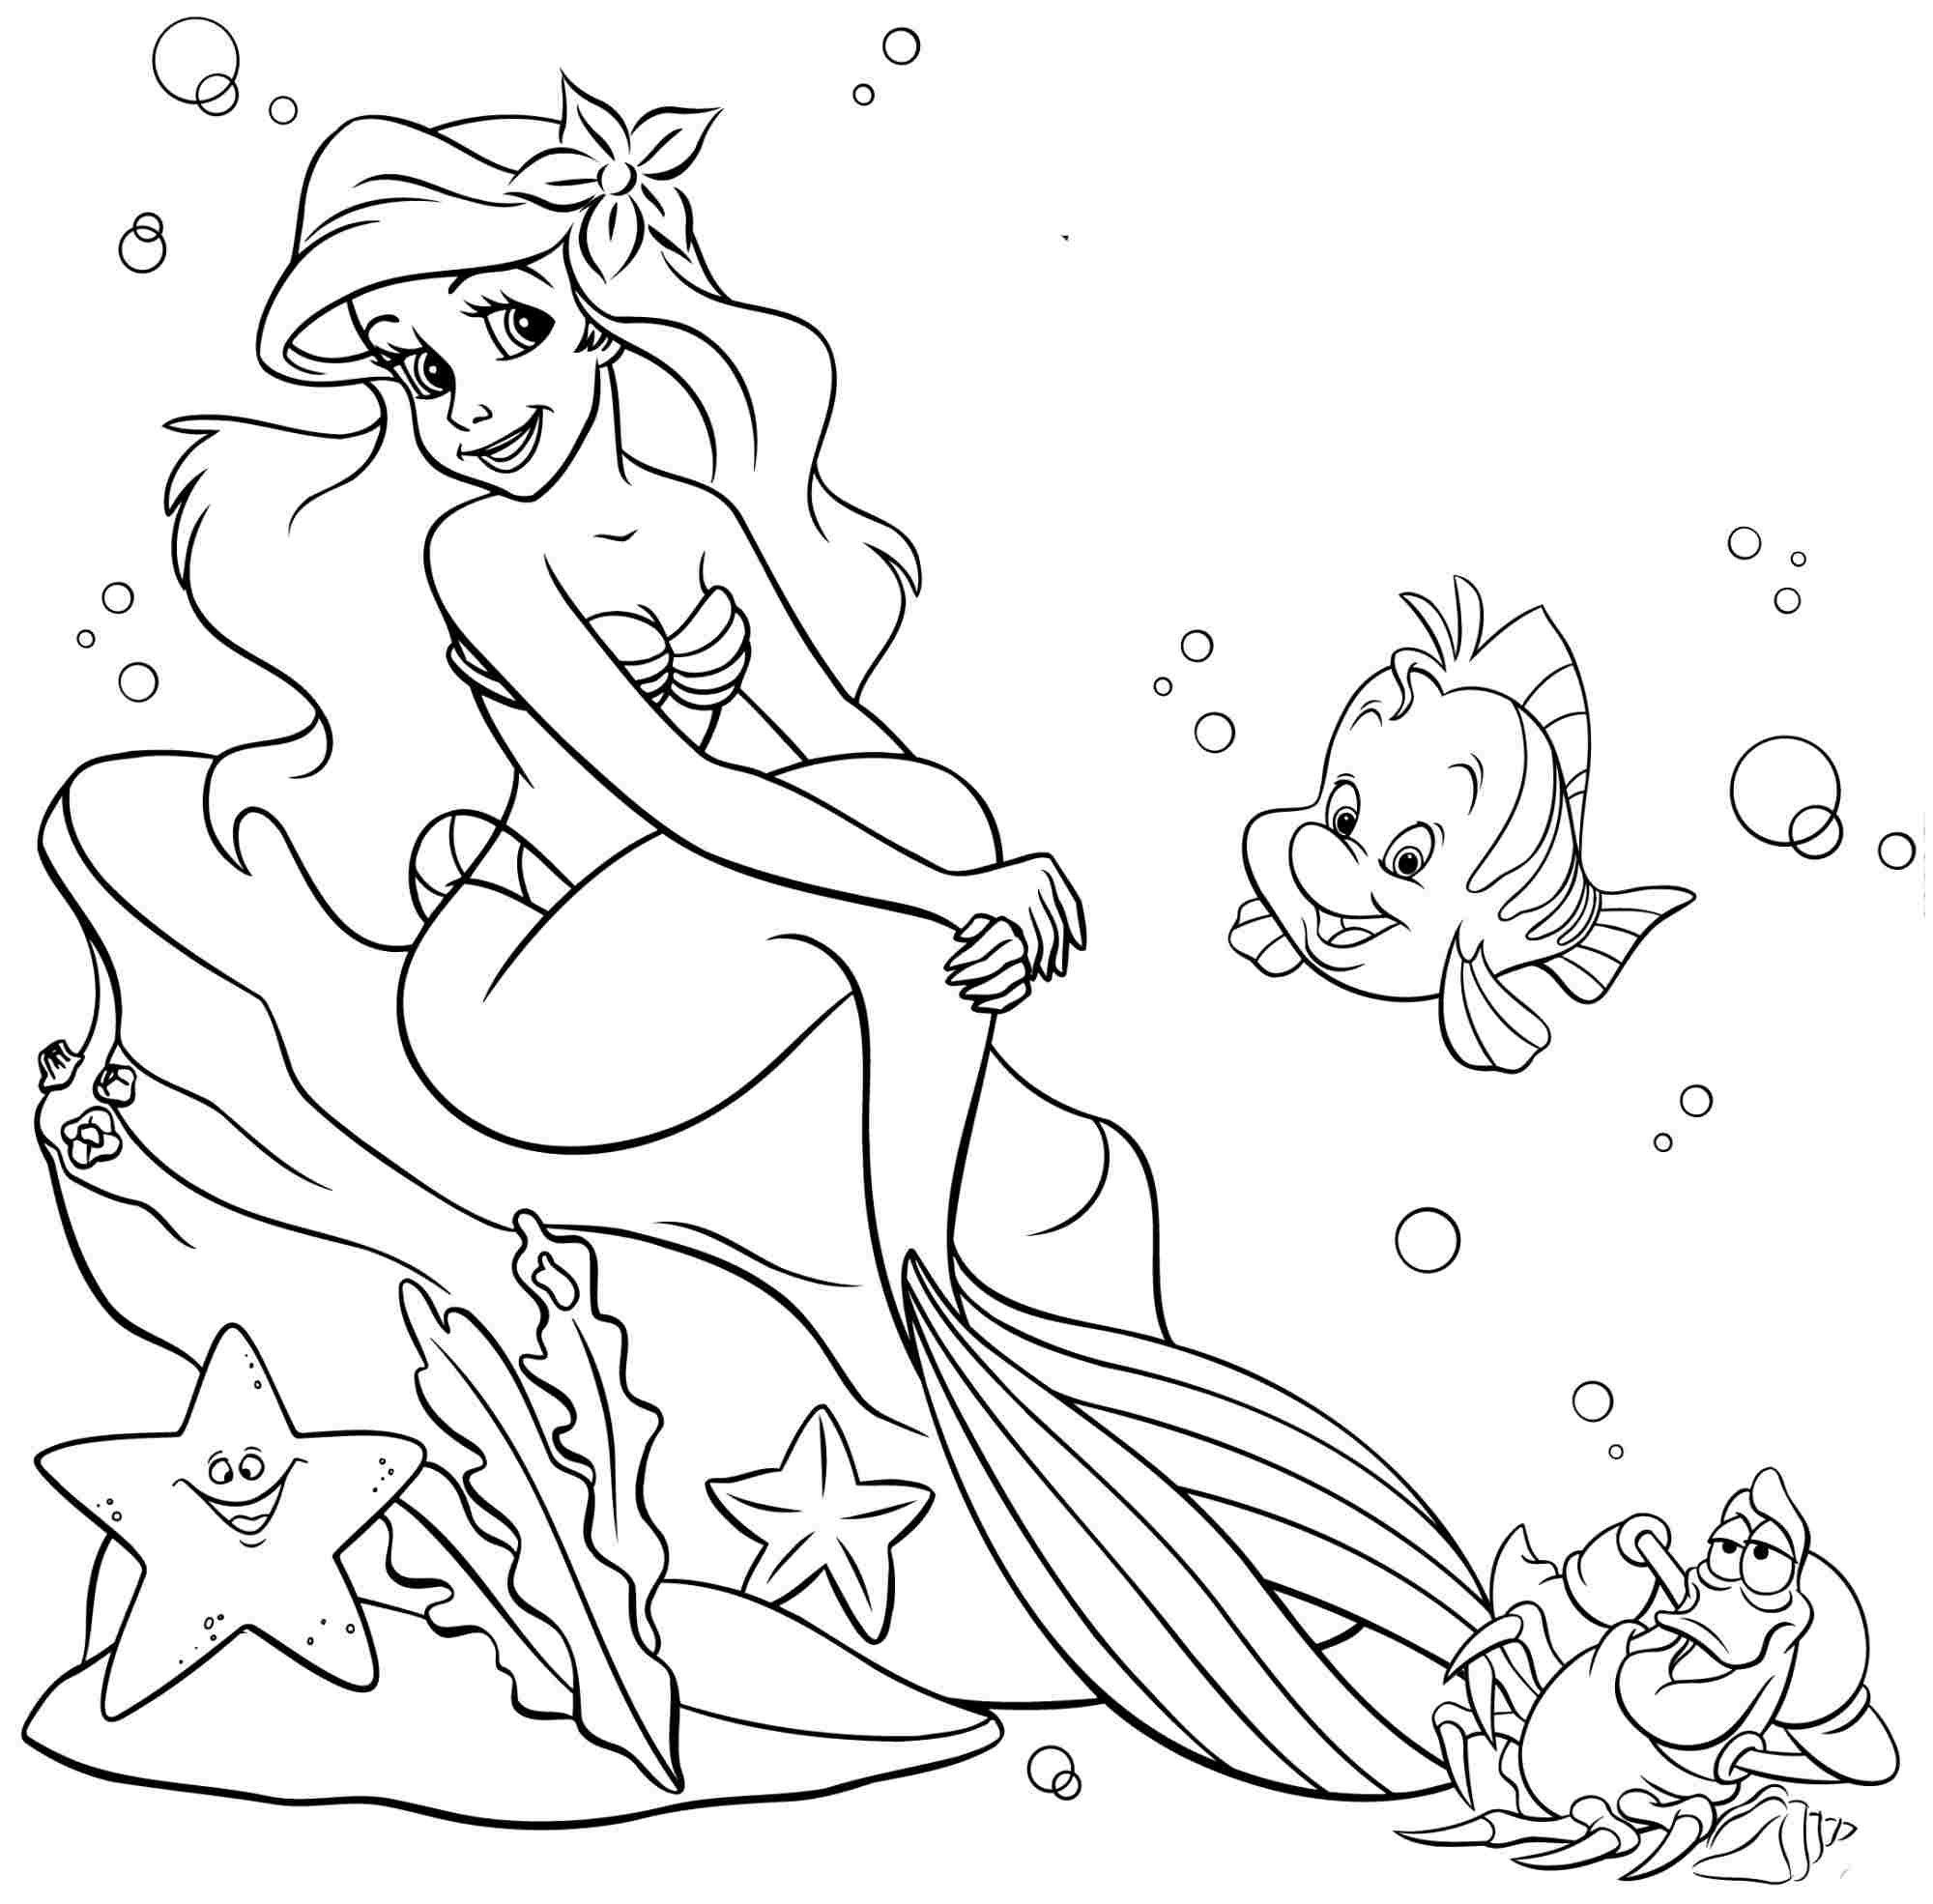 Disney princess coloring pages to print ariel â through the thousands of pictures online regaâ ariel coloring pages mermaid coloring book mermaid coloring pages